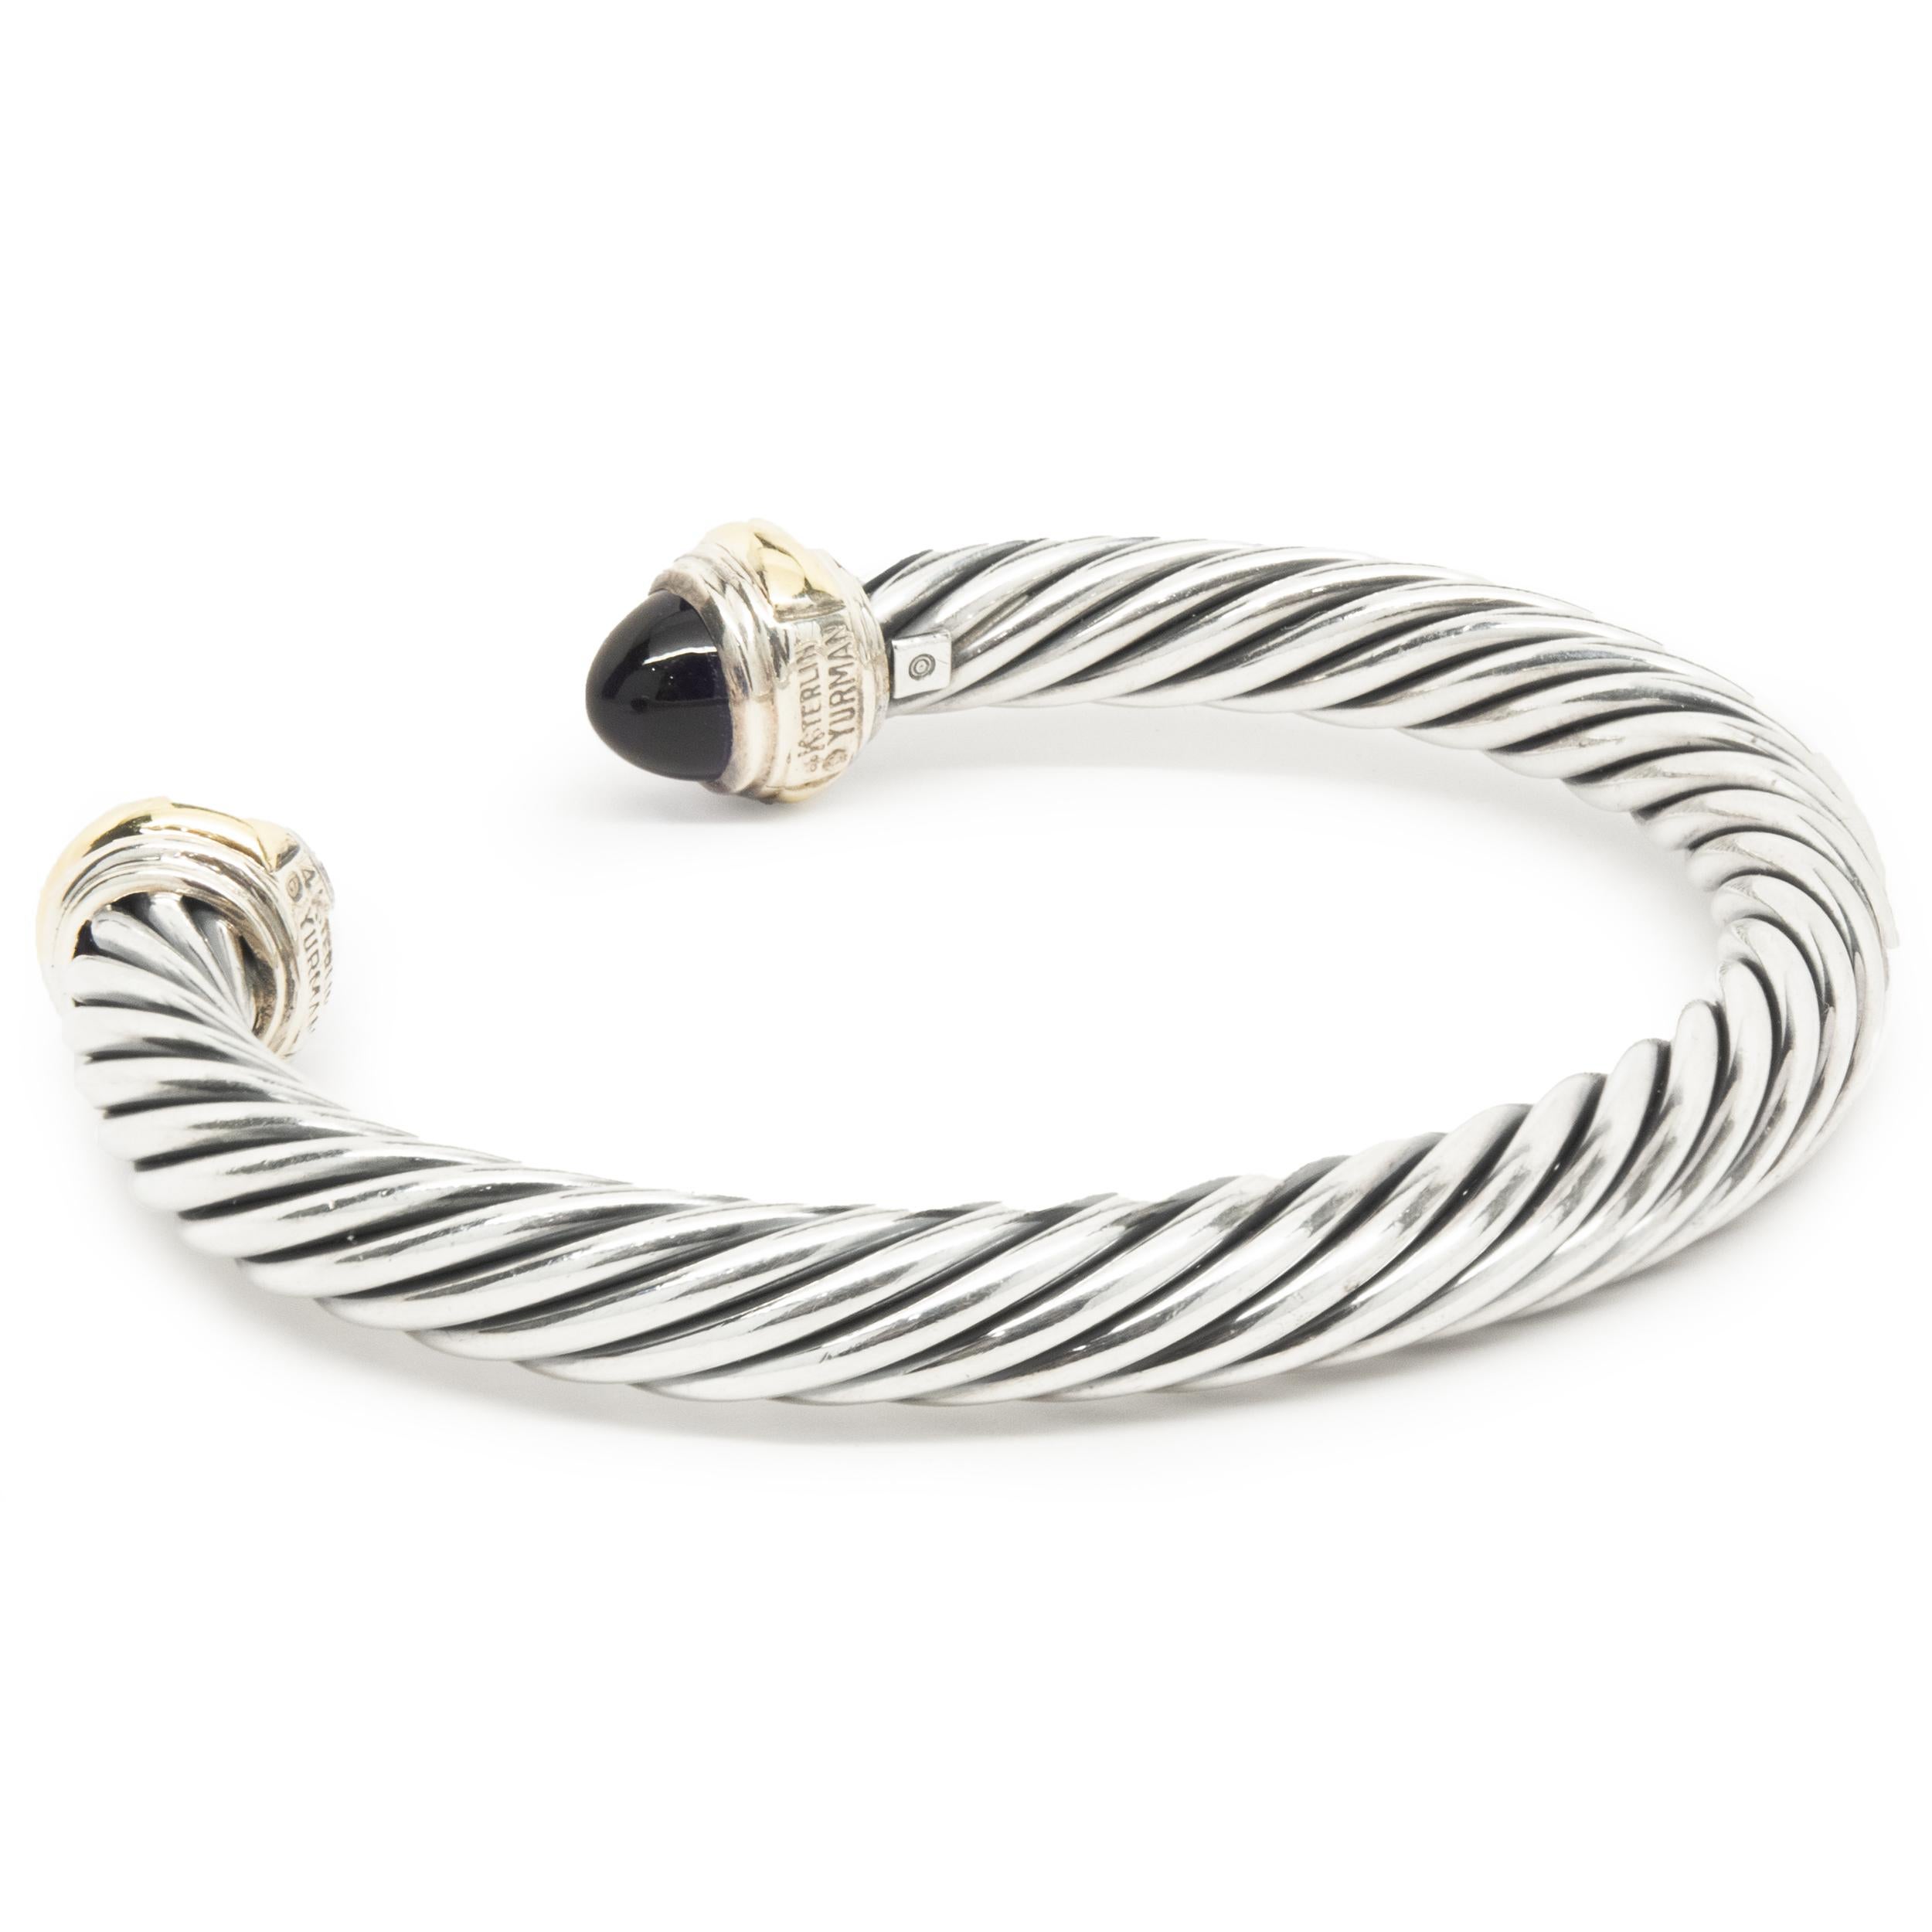 Designer: David Yurman
Material: sterling silver & 14K yellow gold
Dimensions: bracelet will fit up to a 7-inch wrist
Weight: 42.28 grams
